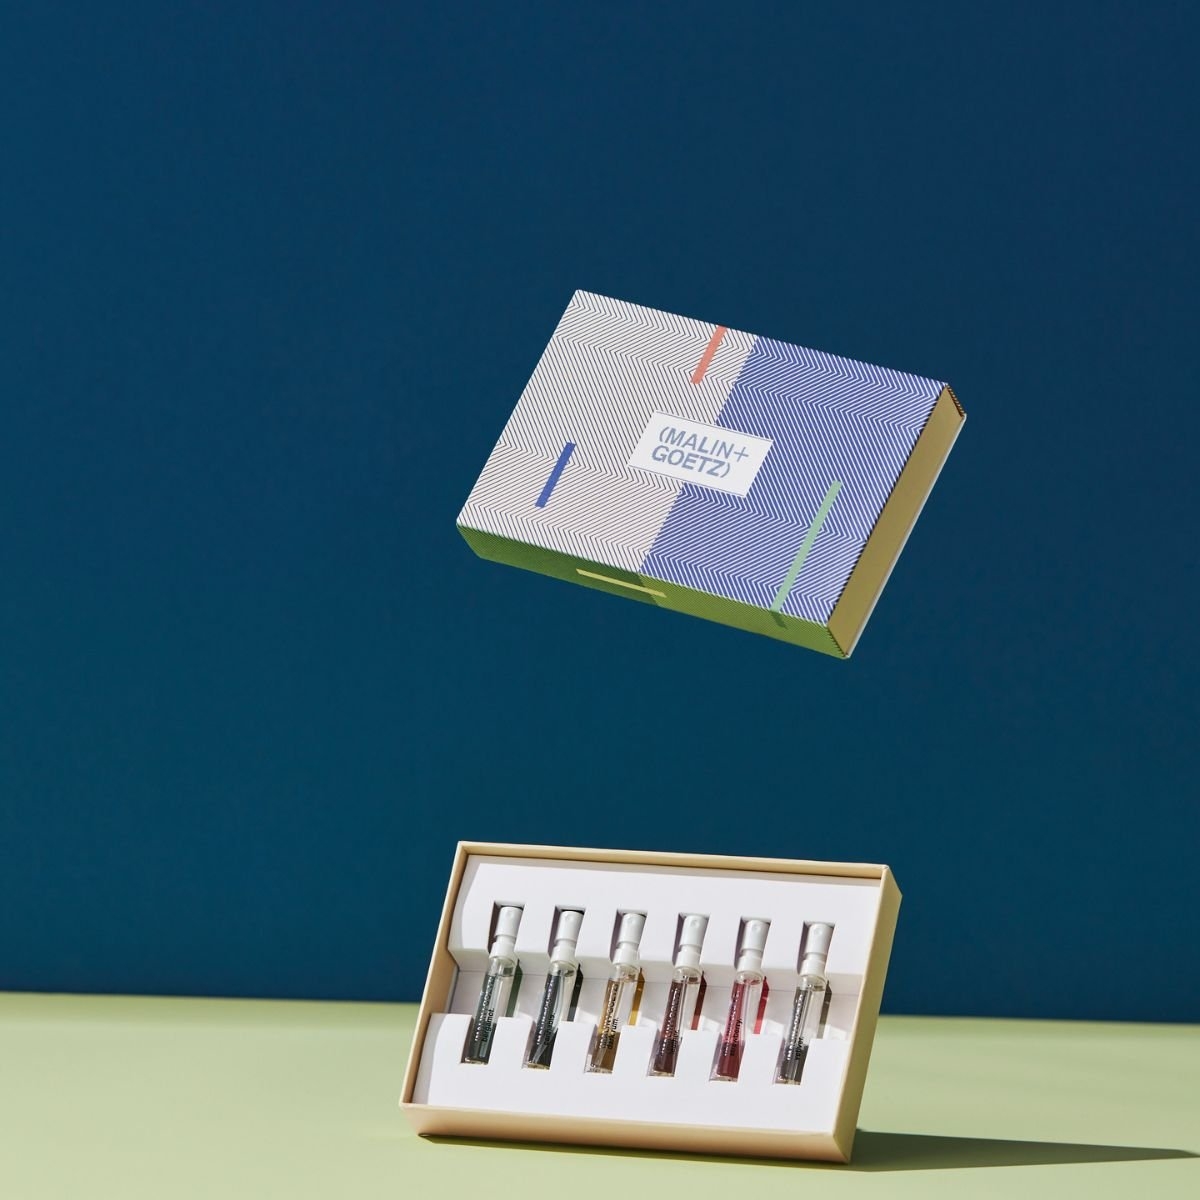 Image of Fragrance discovery kit holiday edition by the brand Malin+Goetz